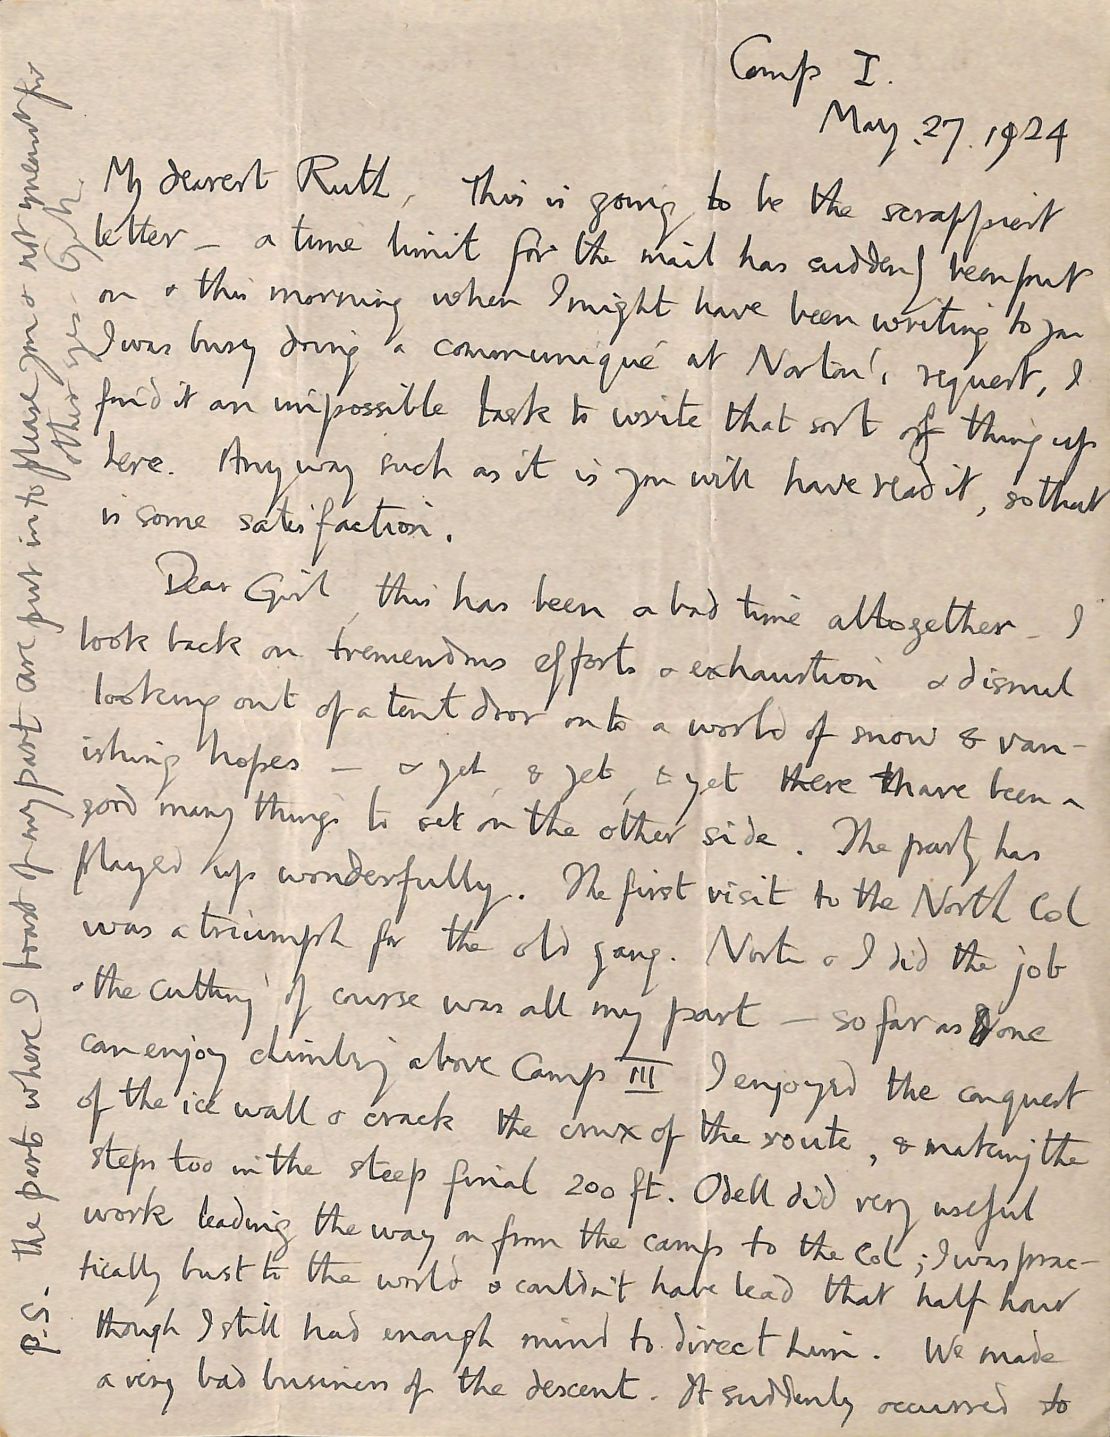 A digitized letter shows part of the final correspondence that Mallory wrote to his wife, Ruth, dated May 27, 1924, as he revealed looking "onto a world of snow & vanishing hopes."